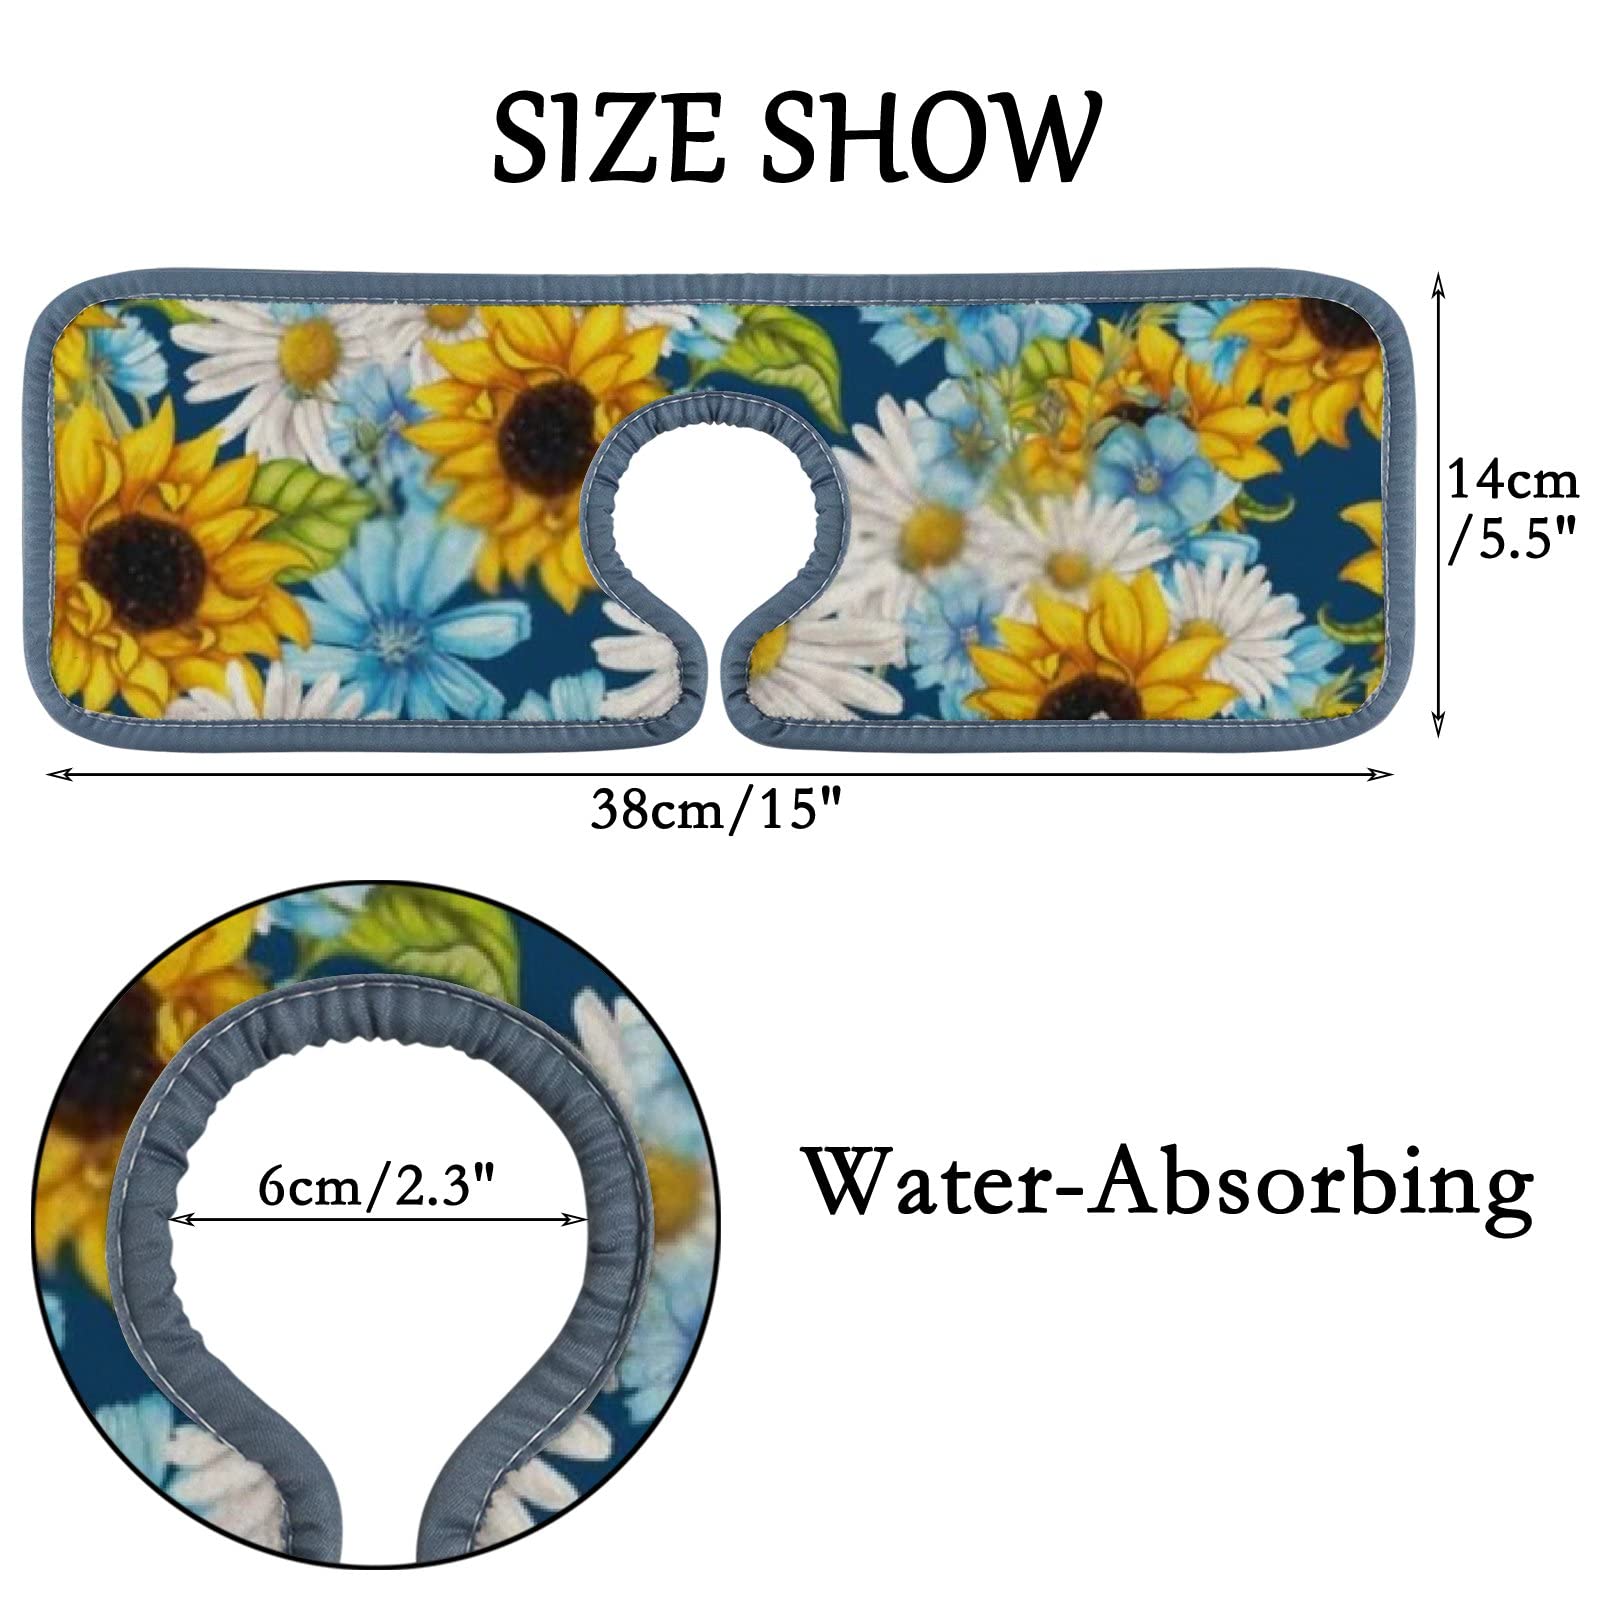 Kitchen Faucet Absorbent Mat 2 Pieces Yellow White Sunflower Daisy Faucet Sink Splash Guard Bathroom Counter and RV,Faucet Counter Sink Water Stains Preventer